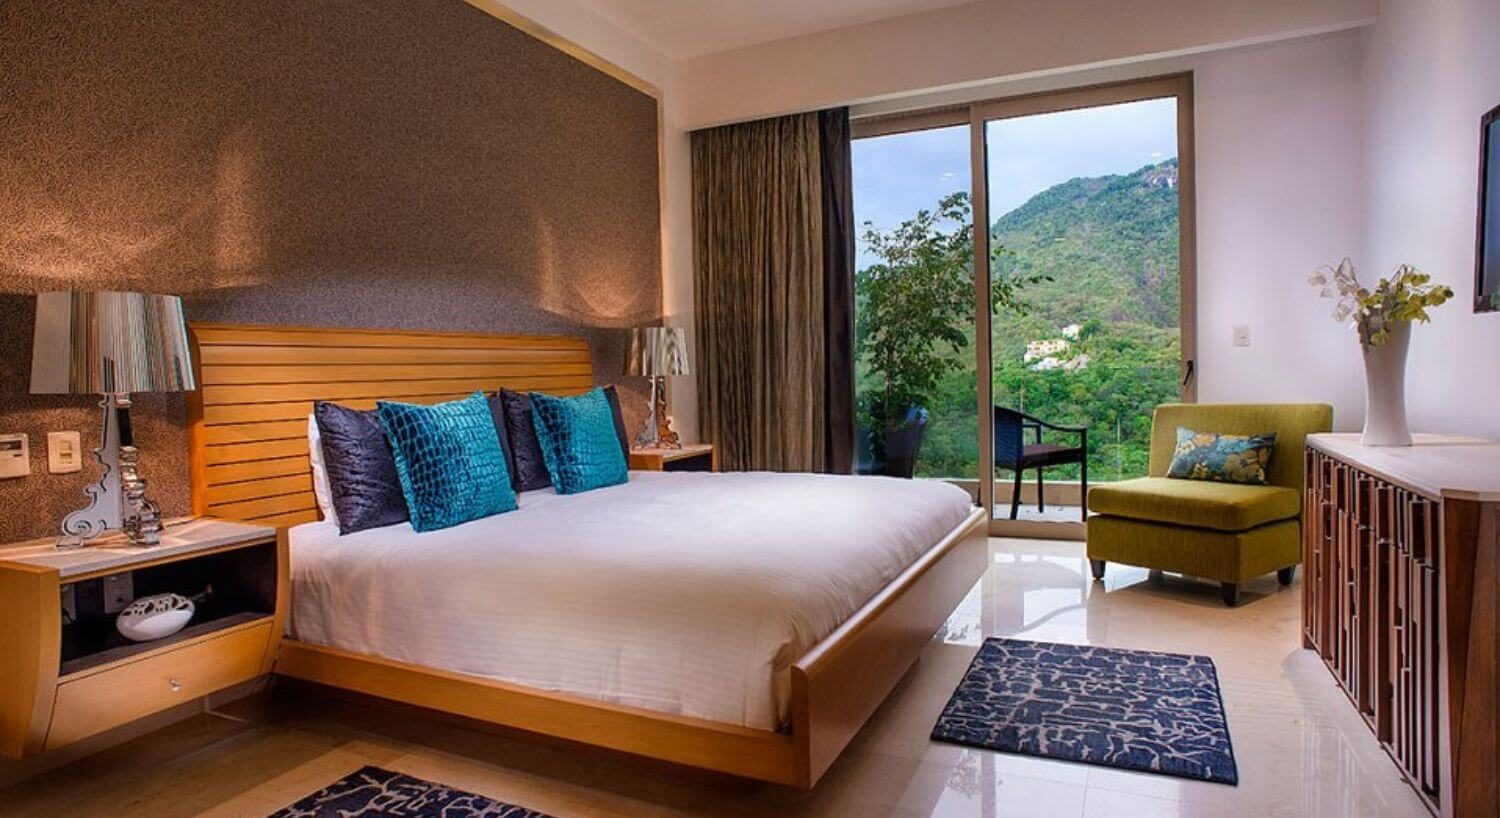 A bedroom with King bed, white beddings with turquoise and deep blue pillows, nightstands on either side with lamps, a dresser, plush armchair, and sliding doors that lead out to a balcony with views of the mountain side.